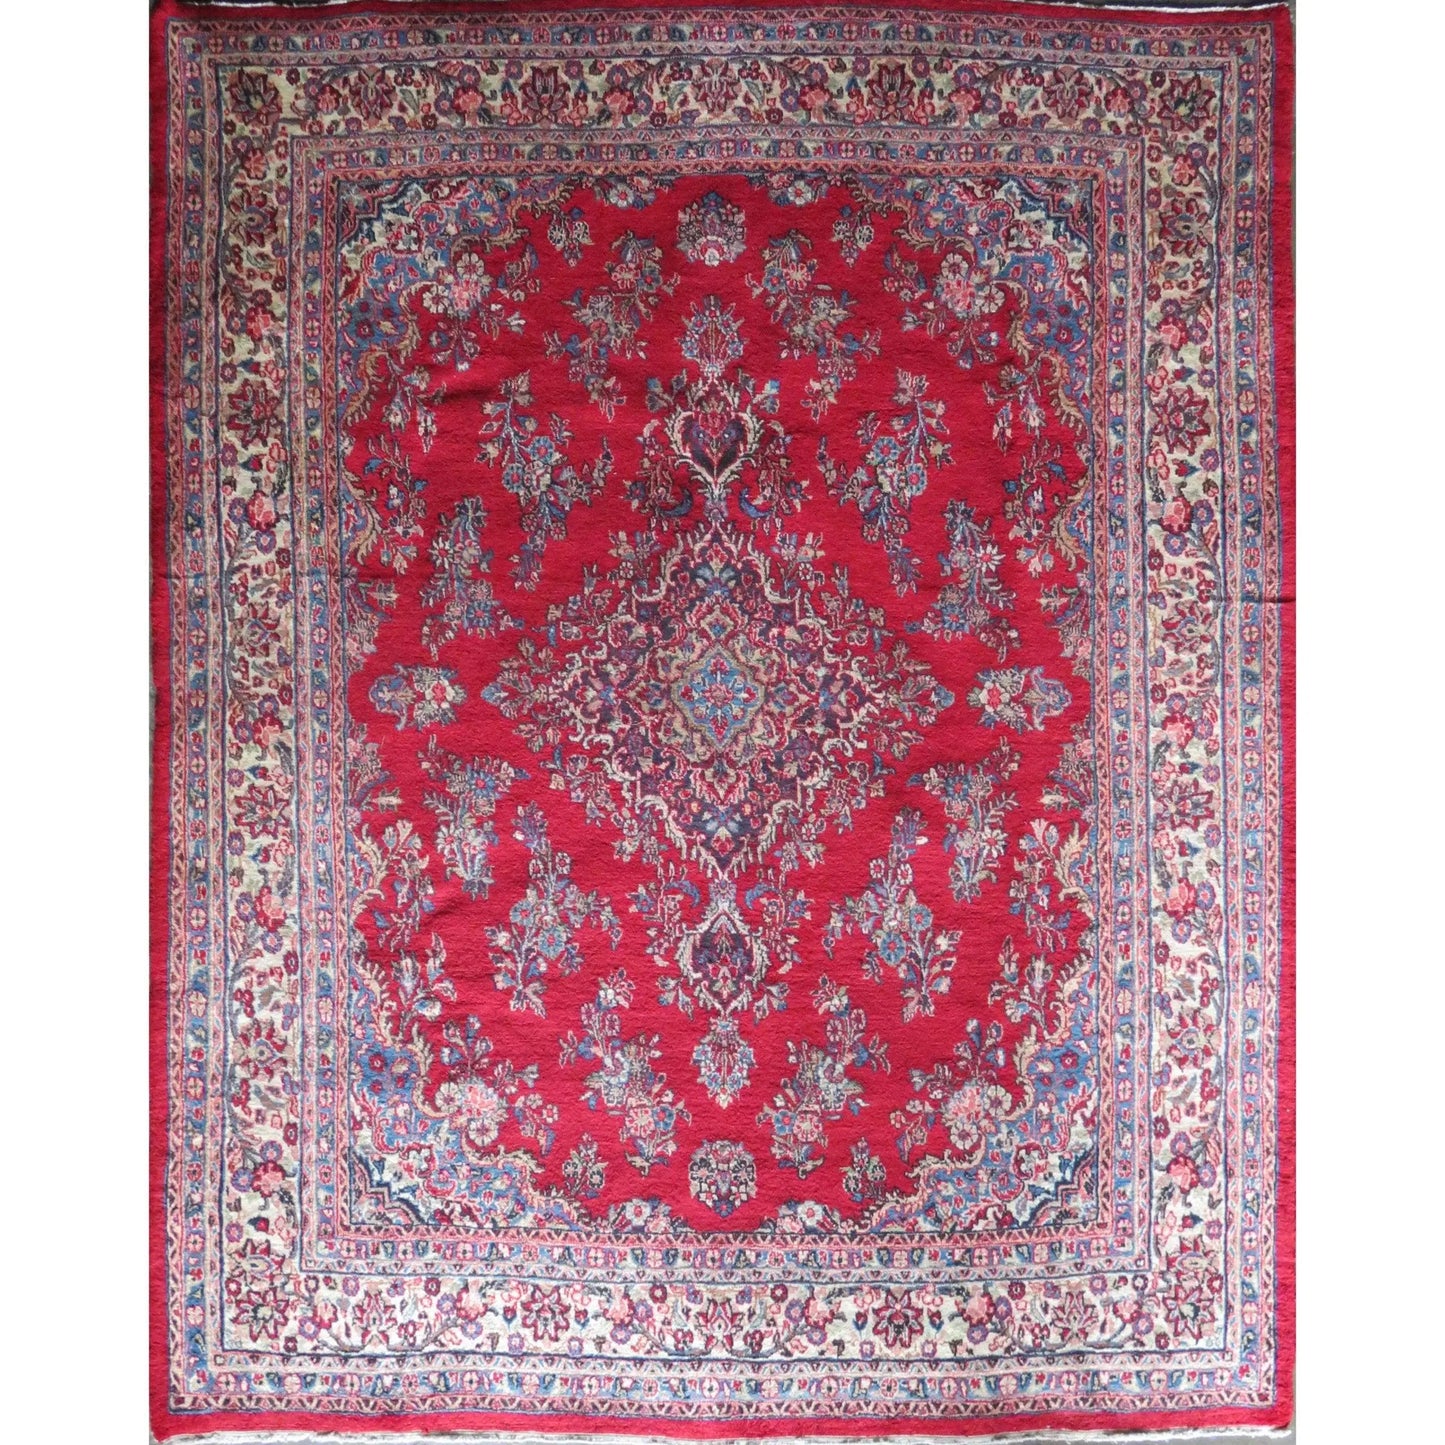 Hand-Knotted Vintage Rug 10'9" x 7'8"